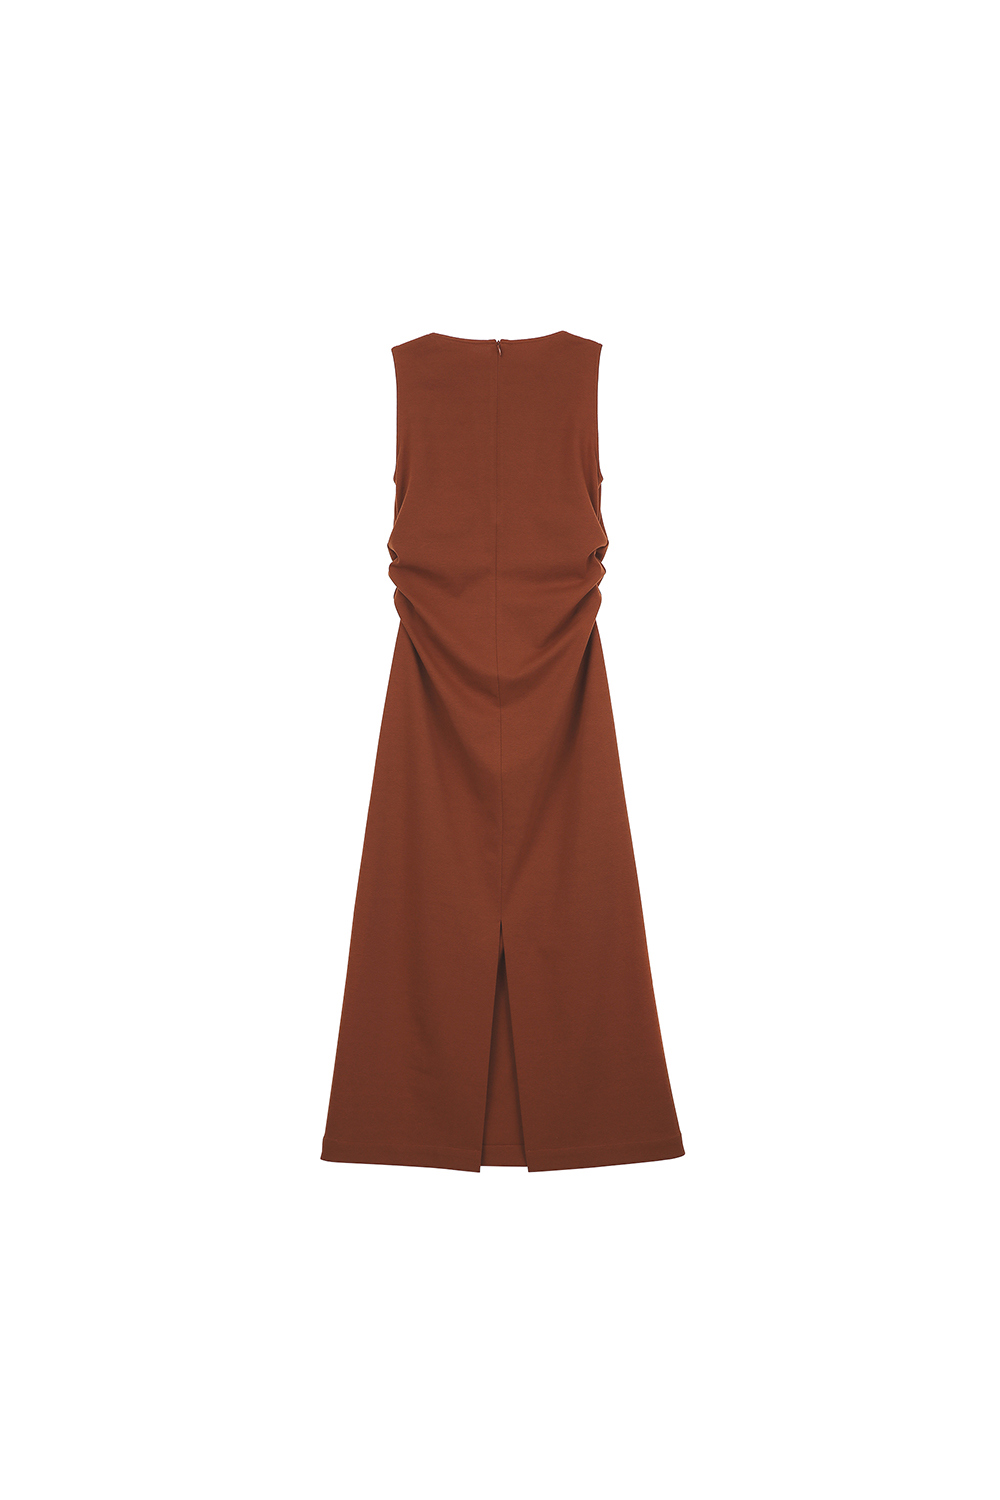 sleeveless brown color image-S1L8